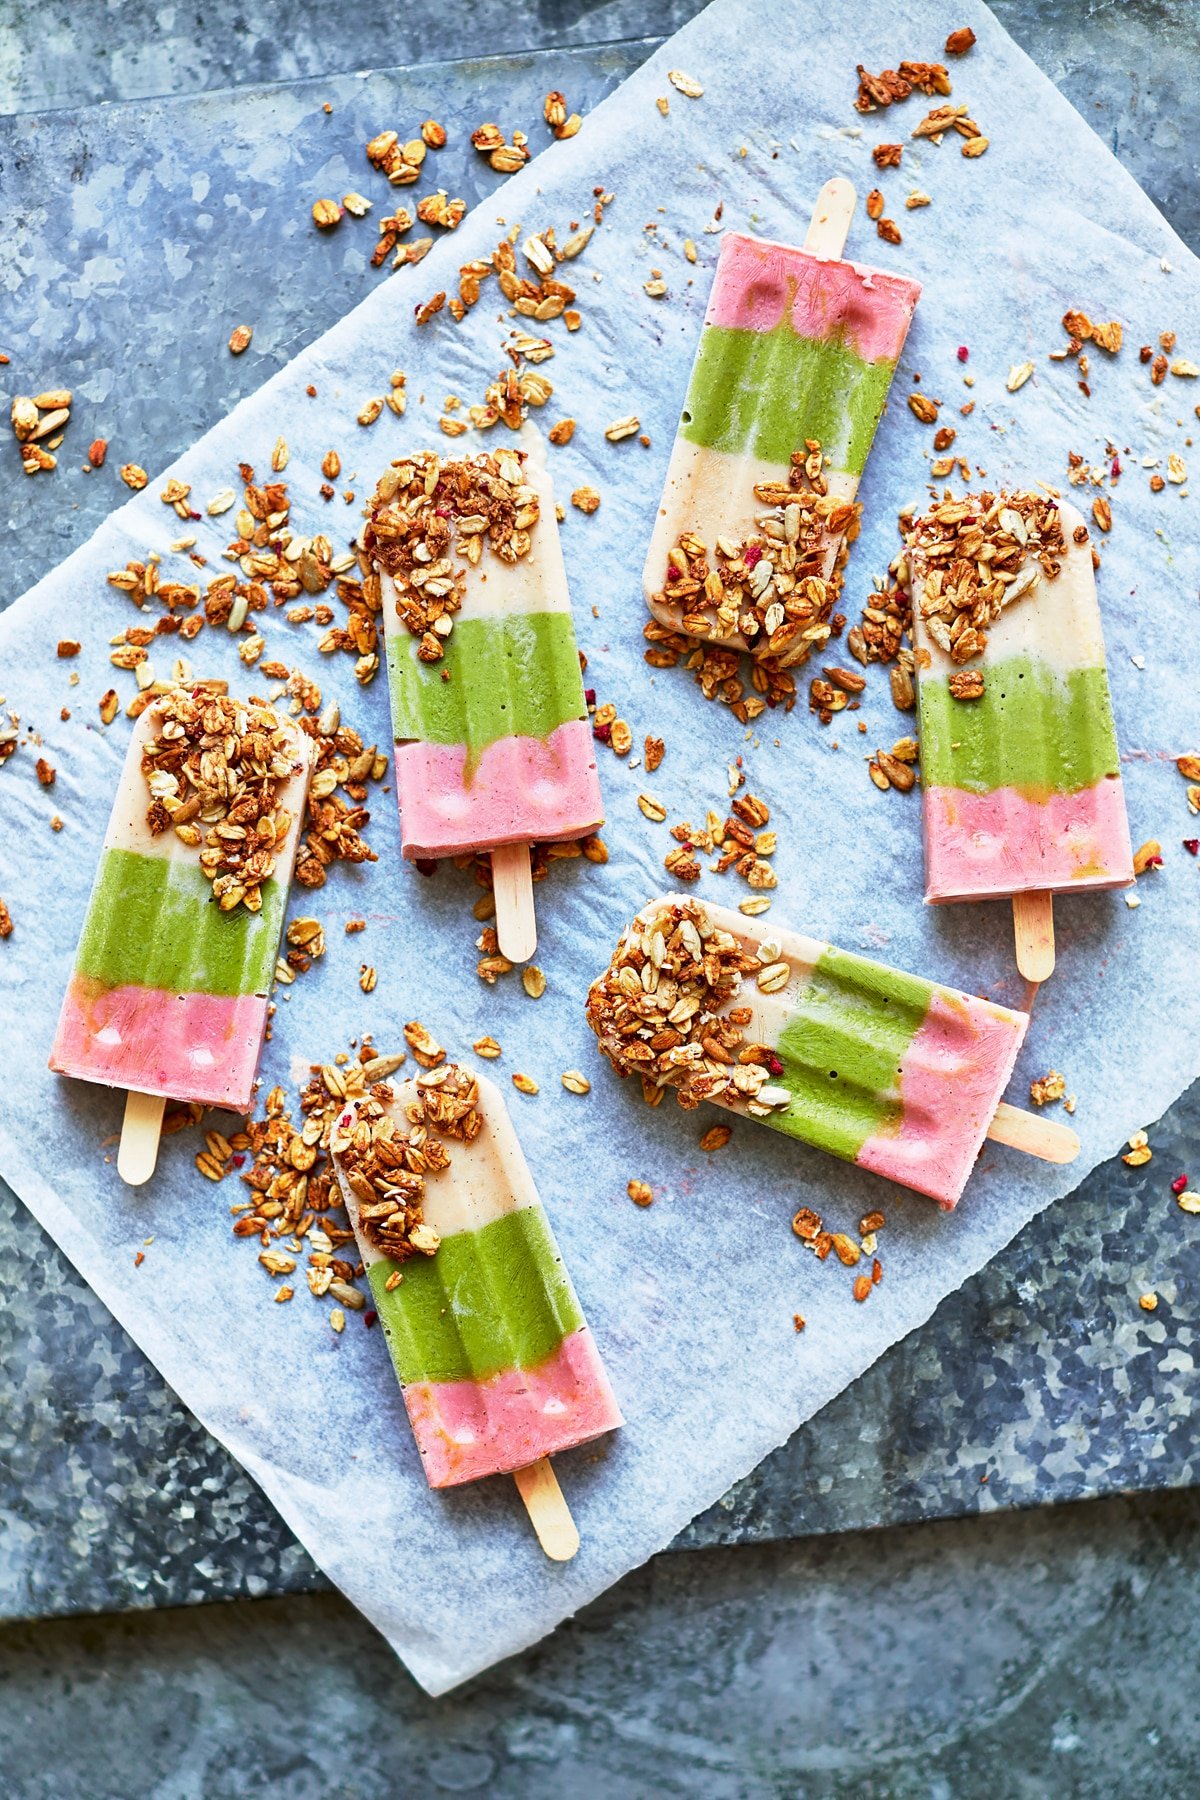 Fruit and veg lollies arranged on a piece of baking paper on a granite board. The lollies have been dipped in granola.